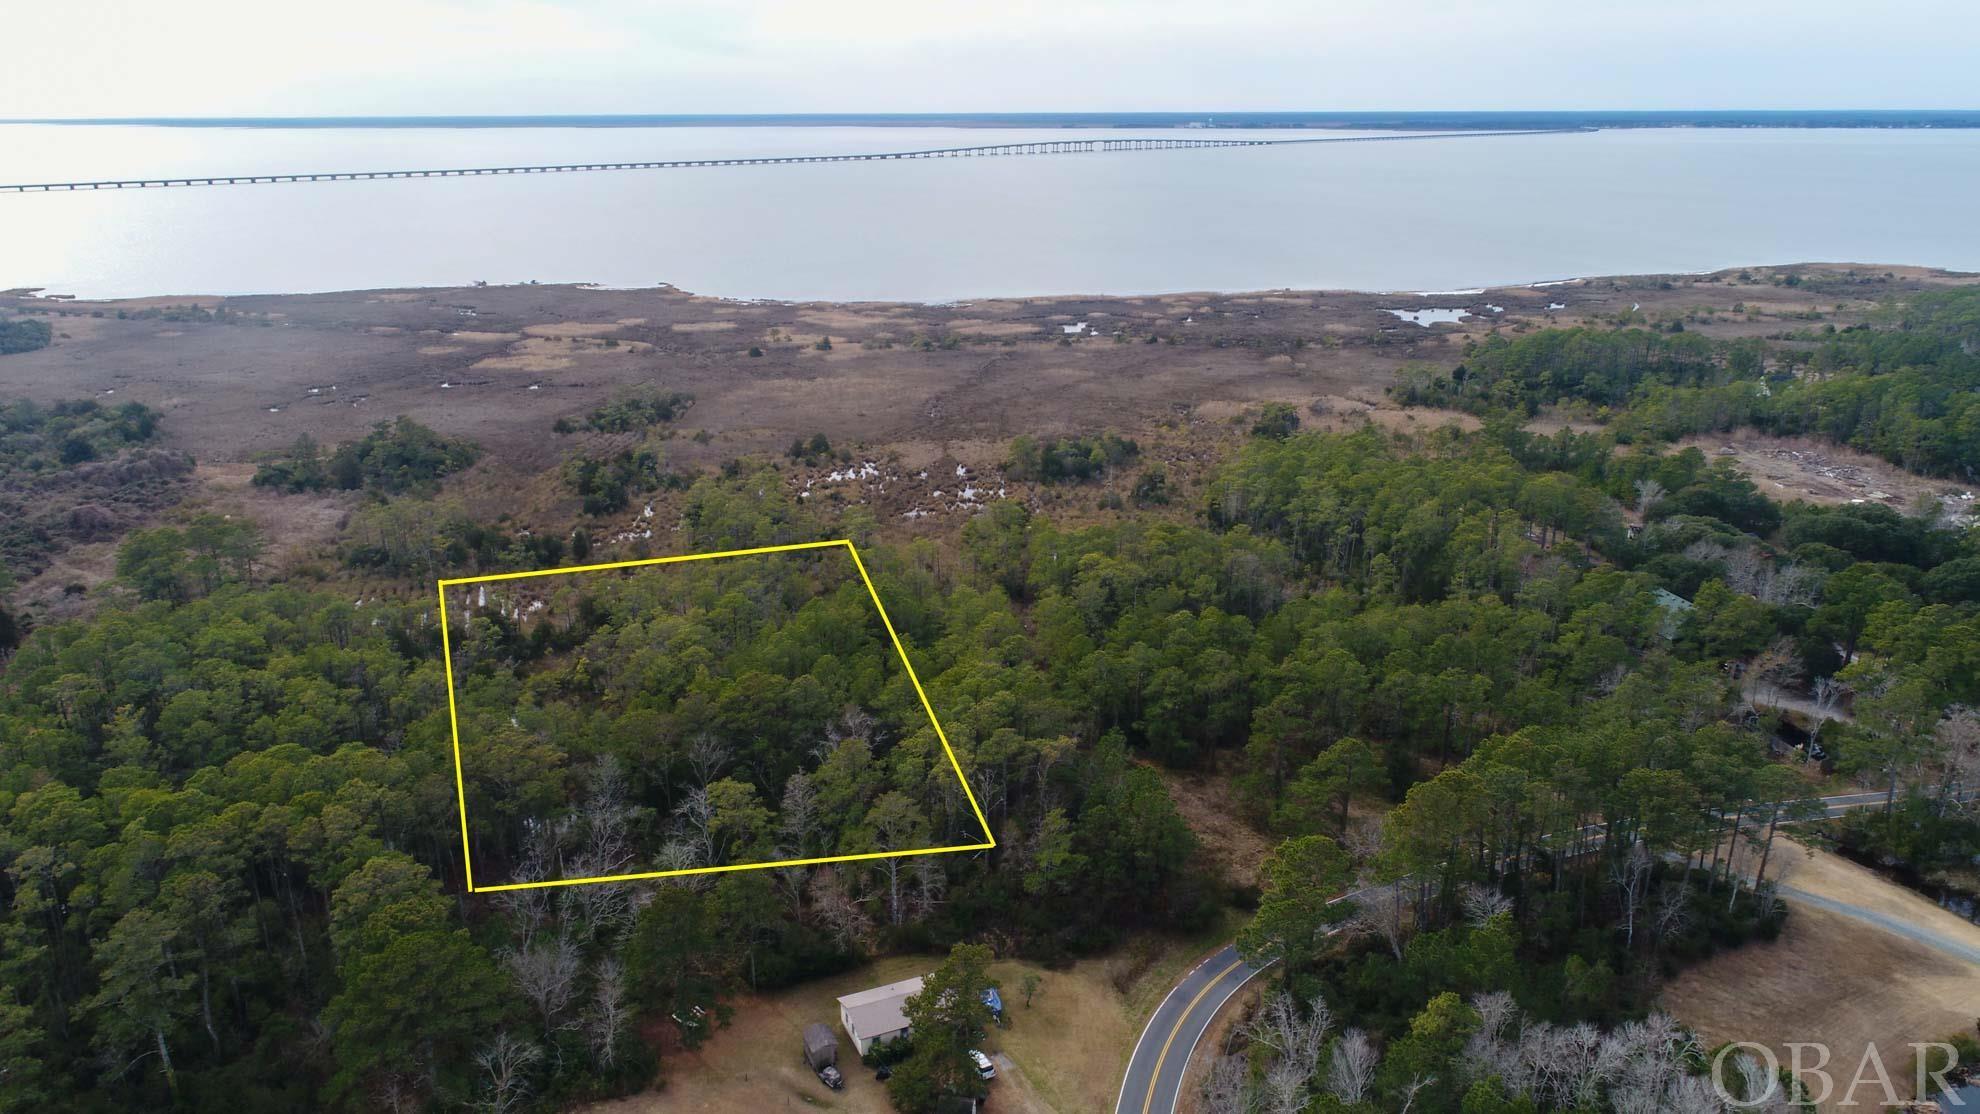 30,000 sqft lot on west side of Roanoke Island.  This semi Soundfront lot could provide water views with proper house design.  The adjoining Soundfront parcel is also available. The three parcels to the are also For Sale